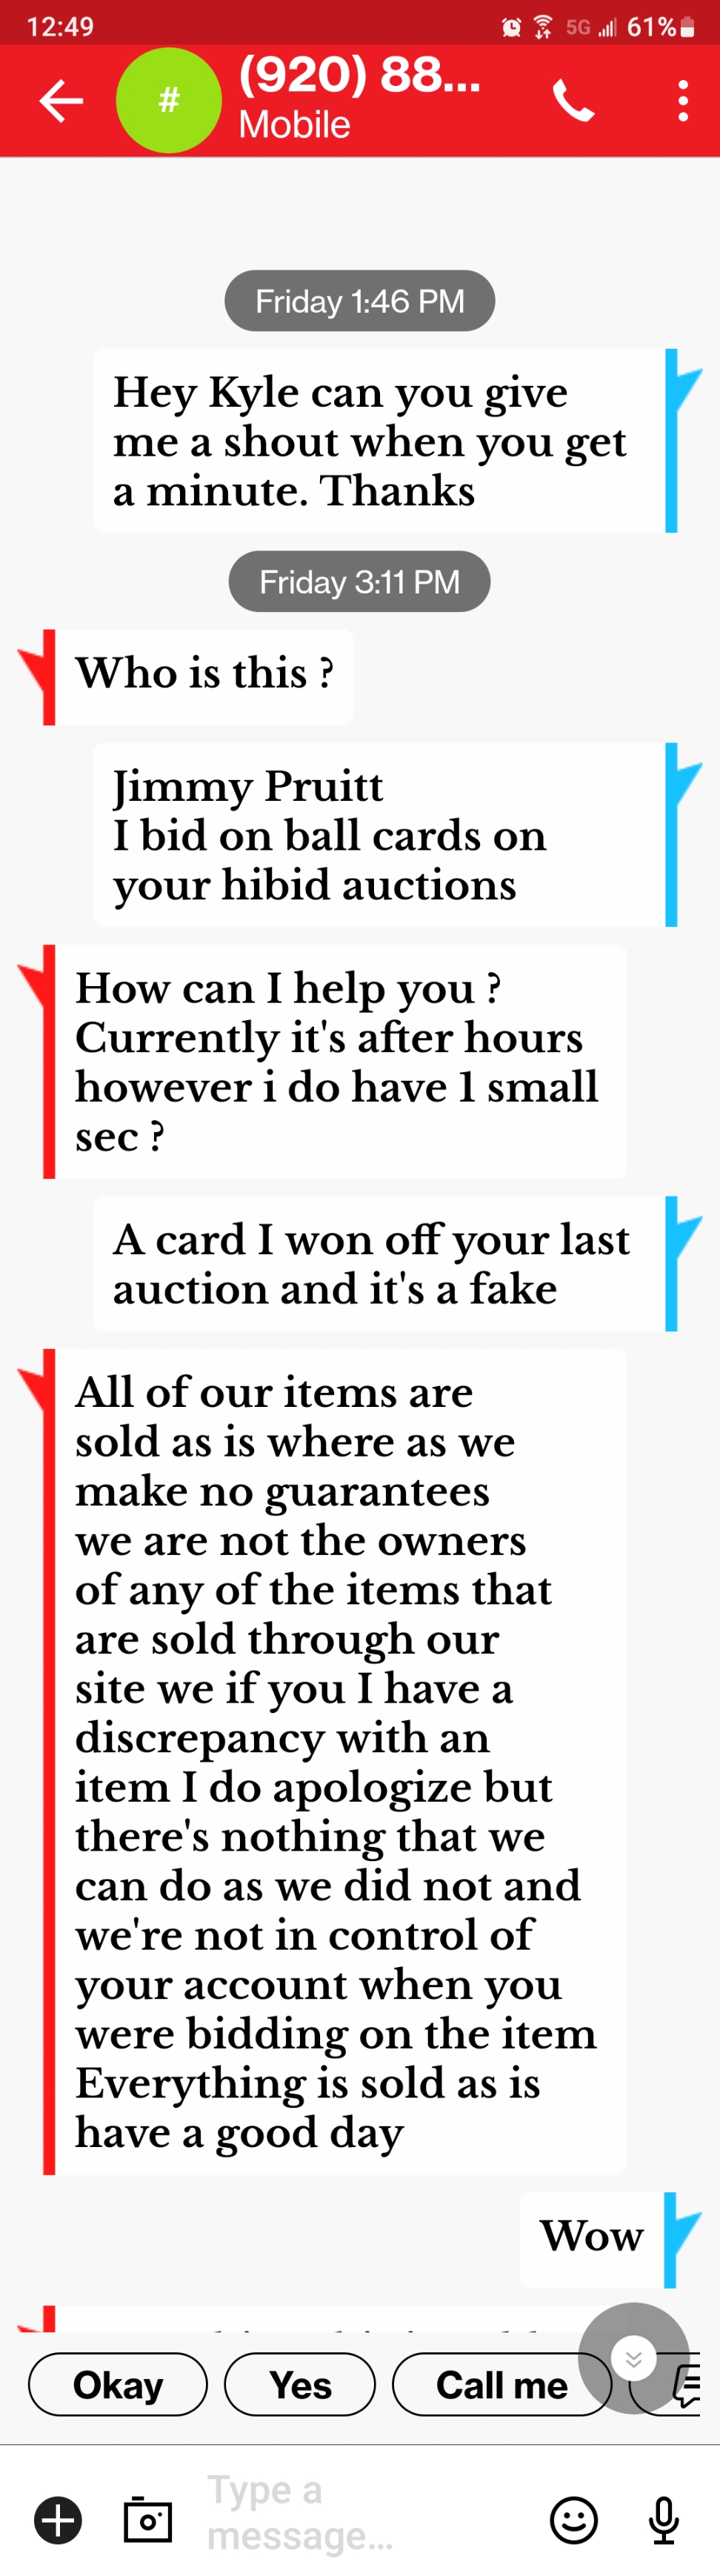 Kyle not willing to make fake card sell right